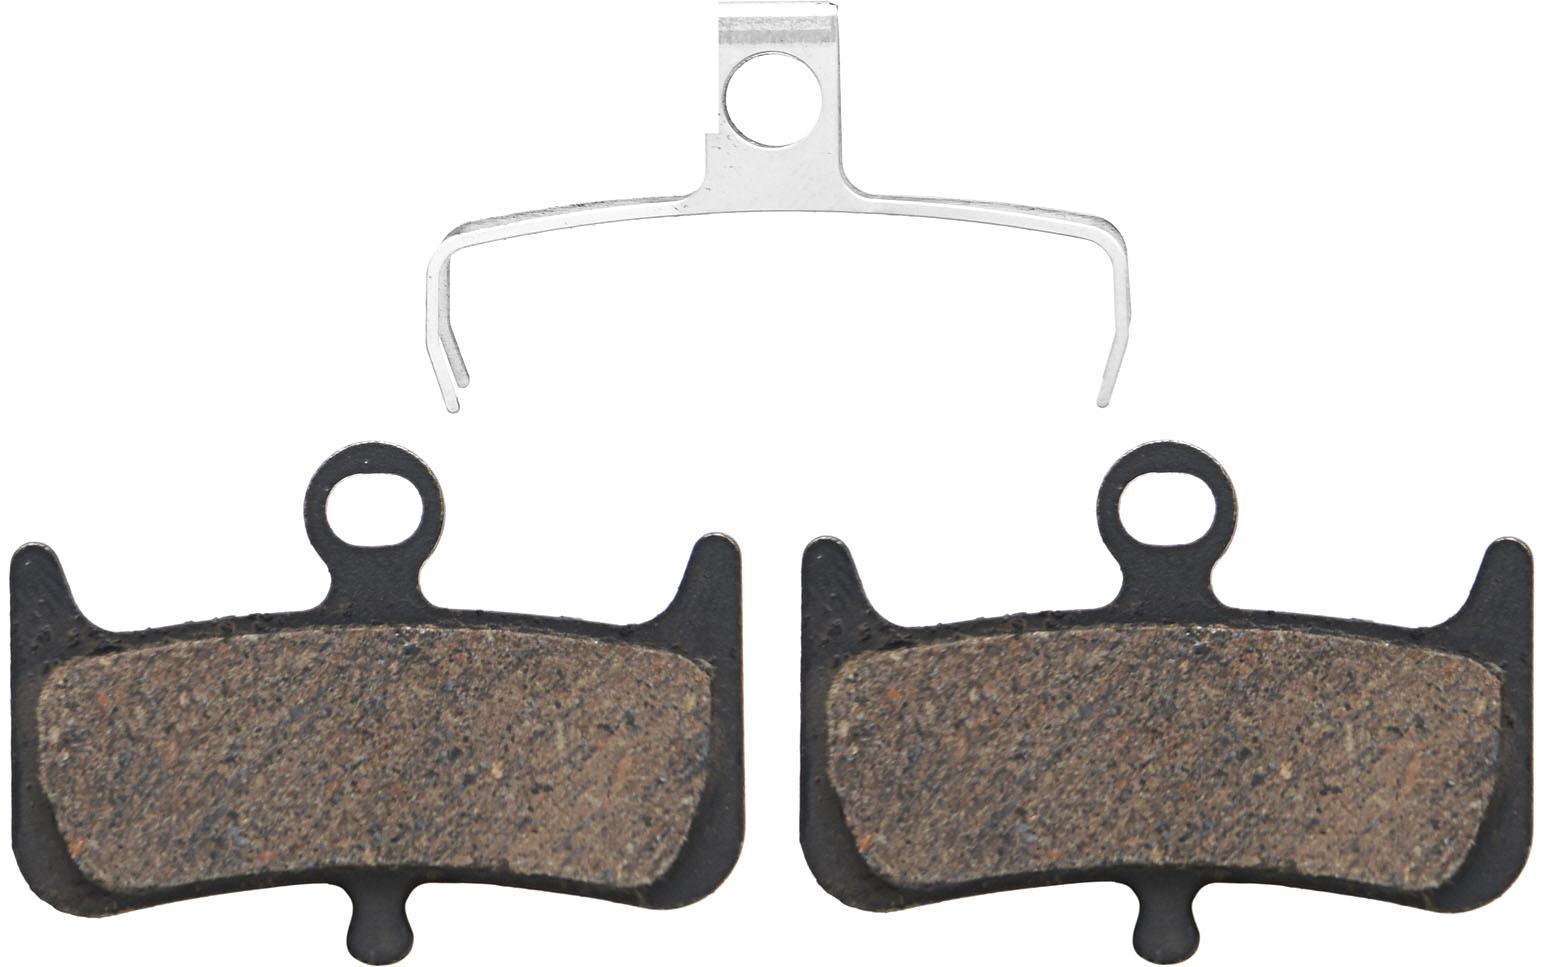 Nukeproof Hayes Dominion A4 Disc Brake Pads - Black